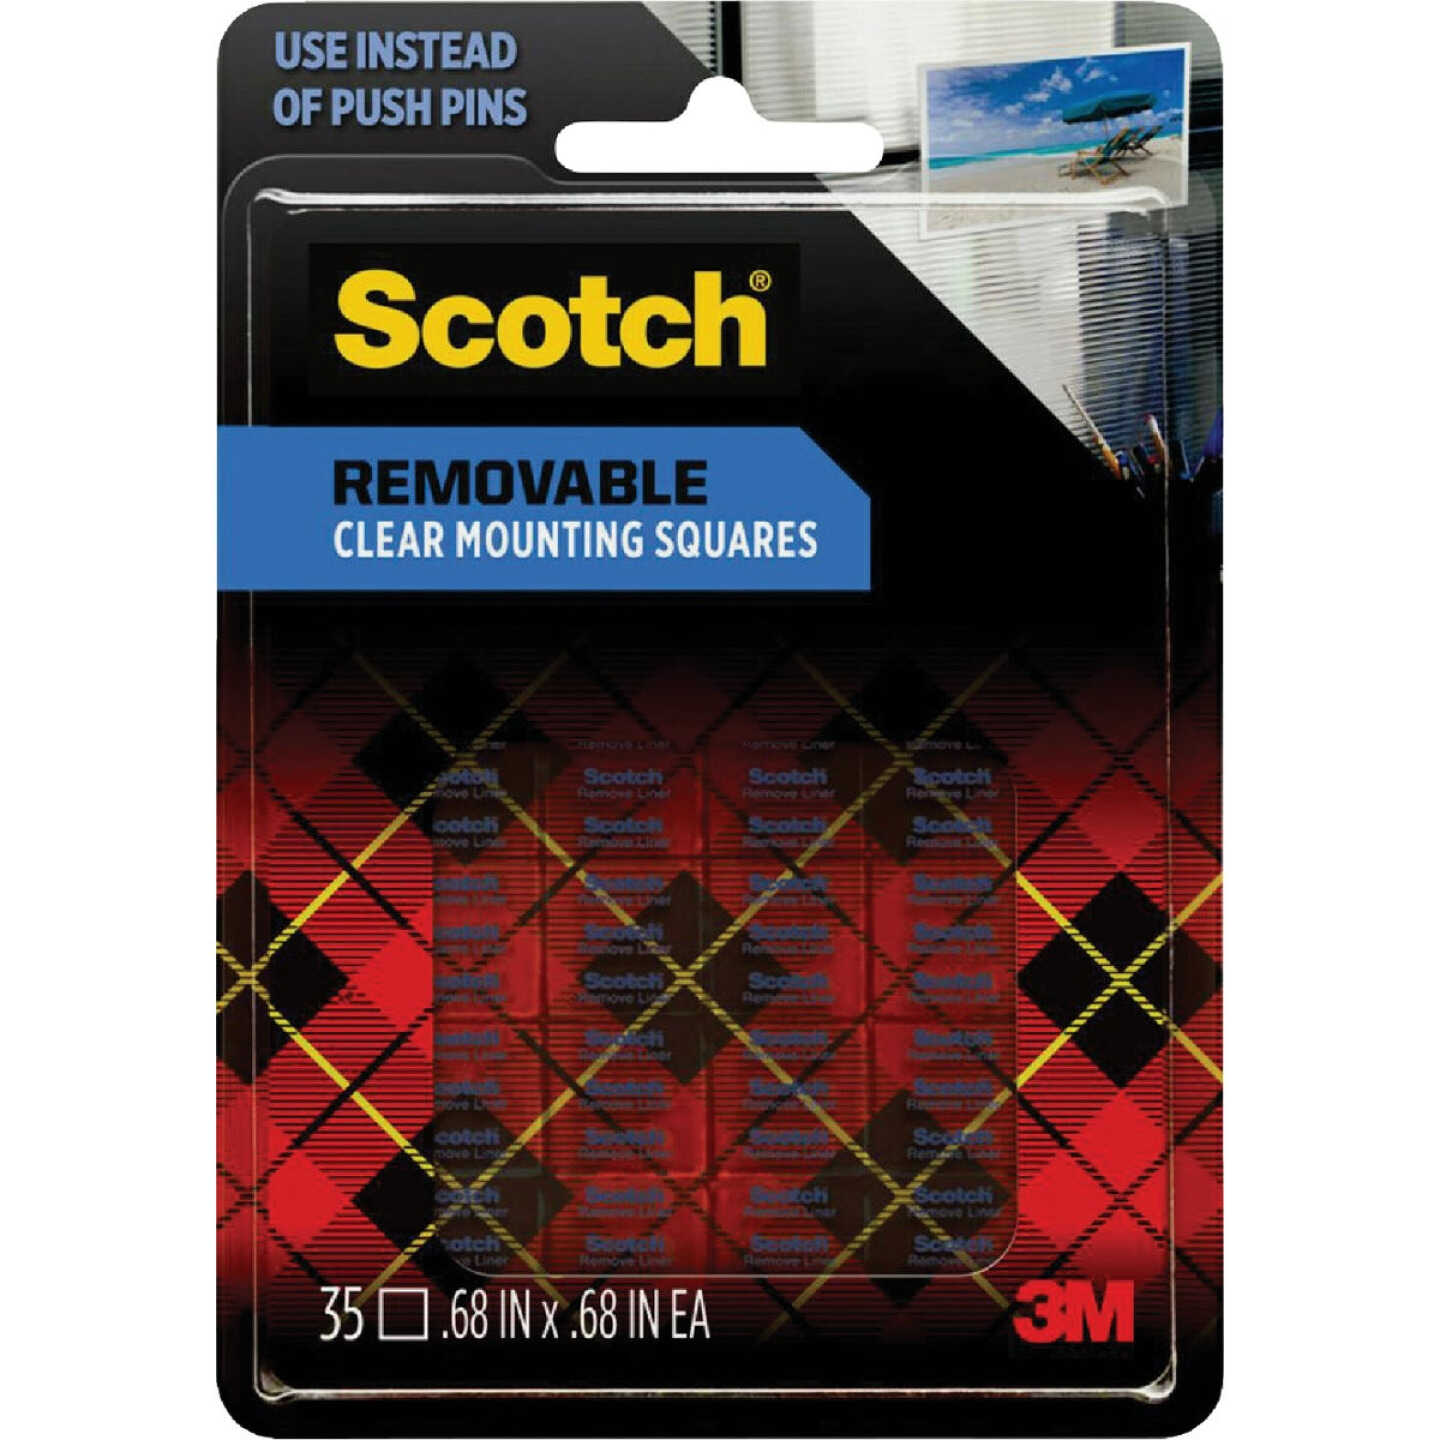 3M Scotch Removable Mounting Squares, 1 x 1